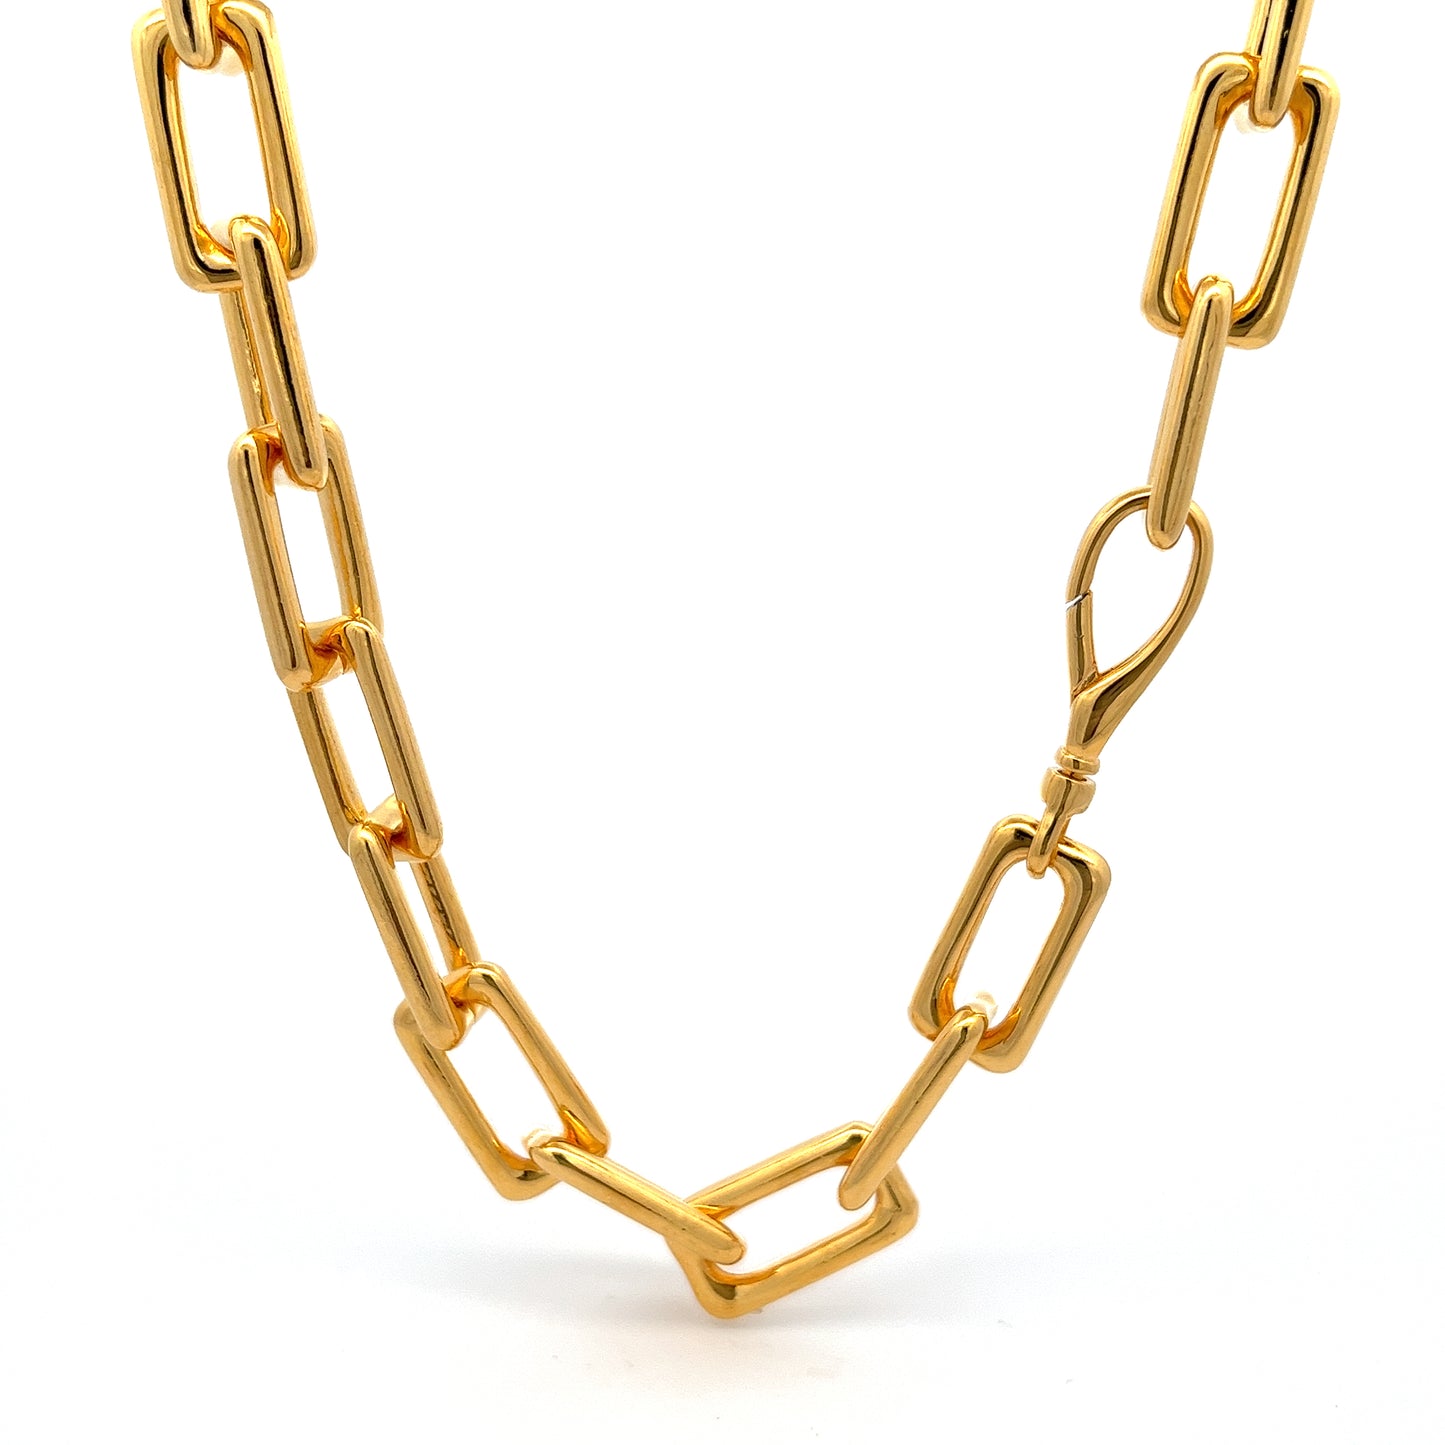 Industrial Chain Necklace in Gold